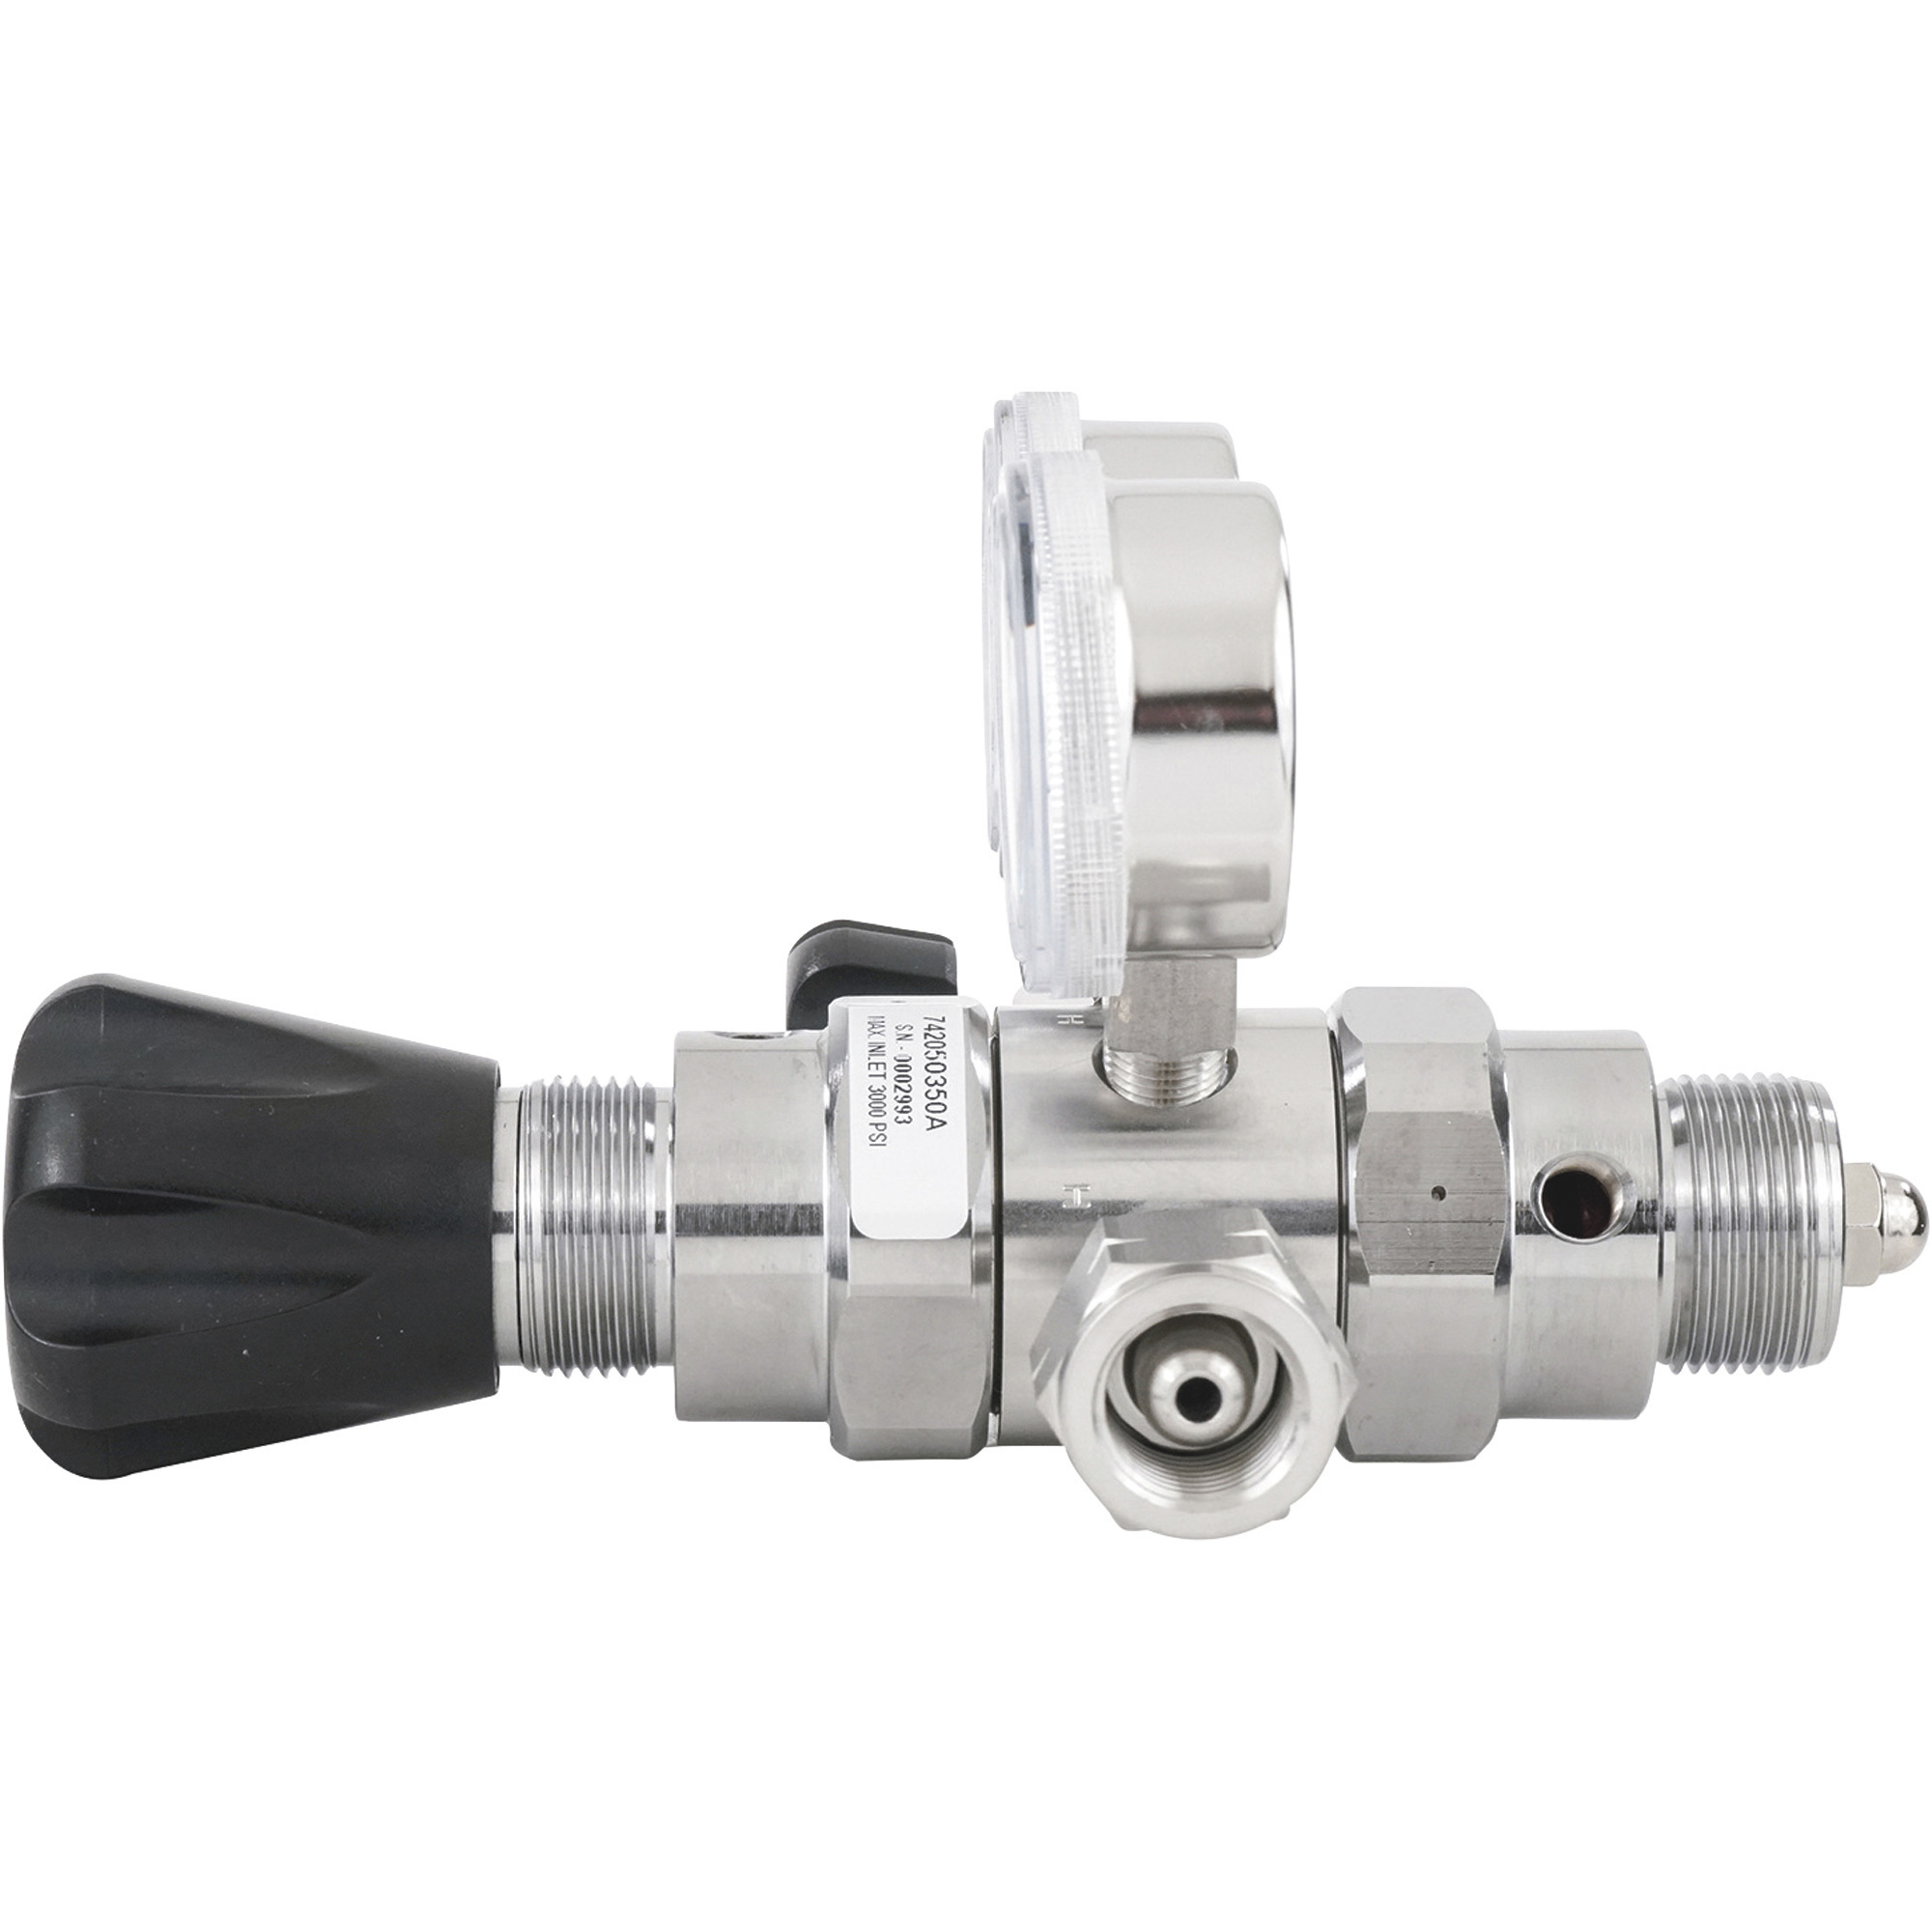 Harris Hydrogen and Flammable Specialty Gas Lab Regulator — CGA 350,  Two-Stage, 316 Stainless Steel, 0–50 PSI, Model# HP742-050-350-A Northern  Tool